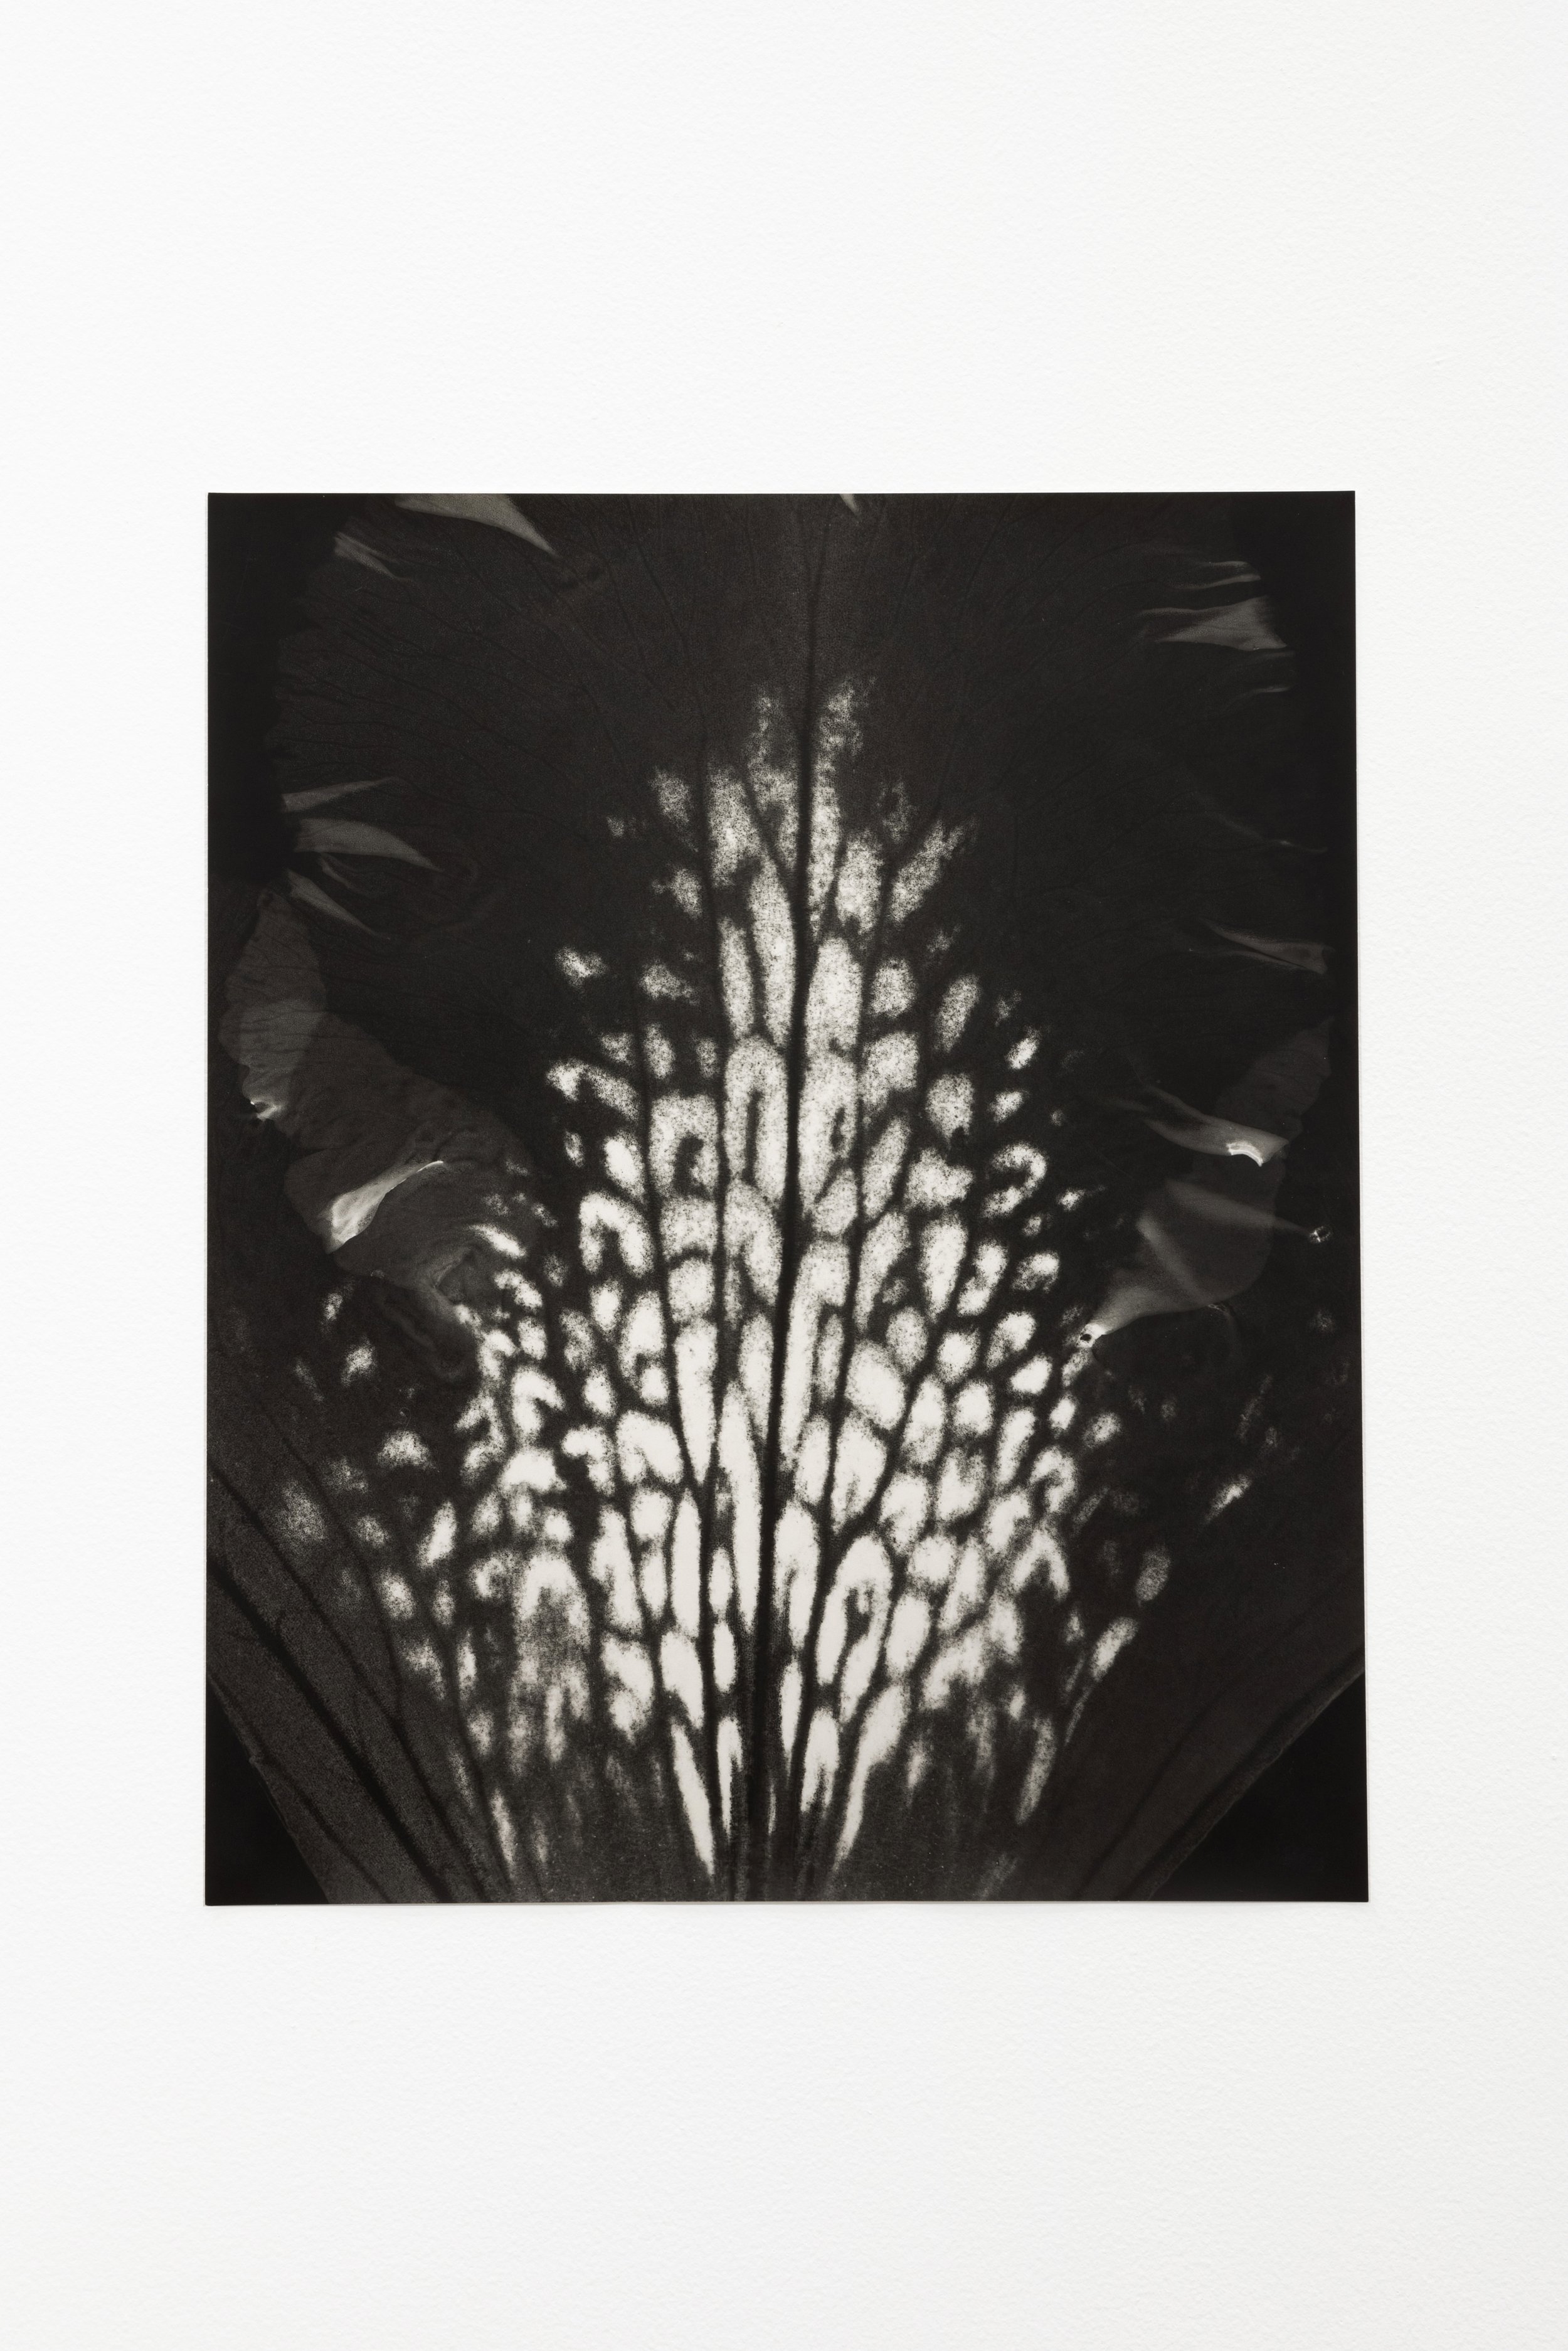  Honeyguides II, 2022, silver gelatin print, 58 x 47 cm, foliogram, unique. a petal of a   Rhododendron   flower was used as a negative    